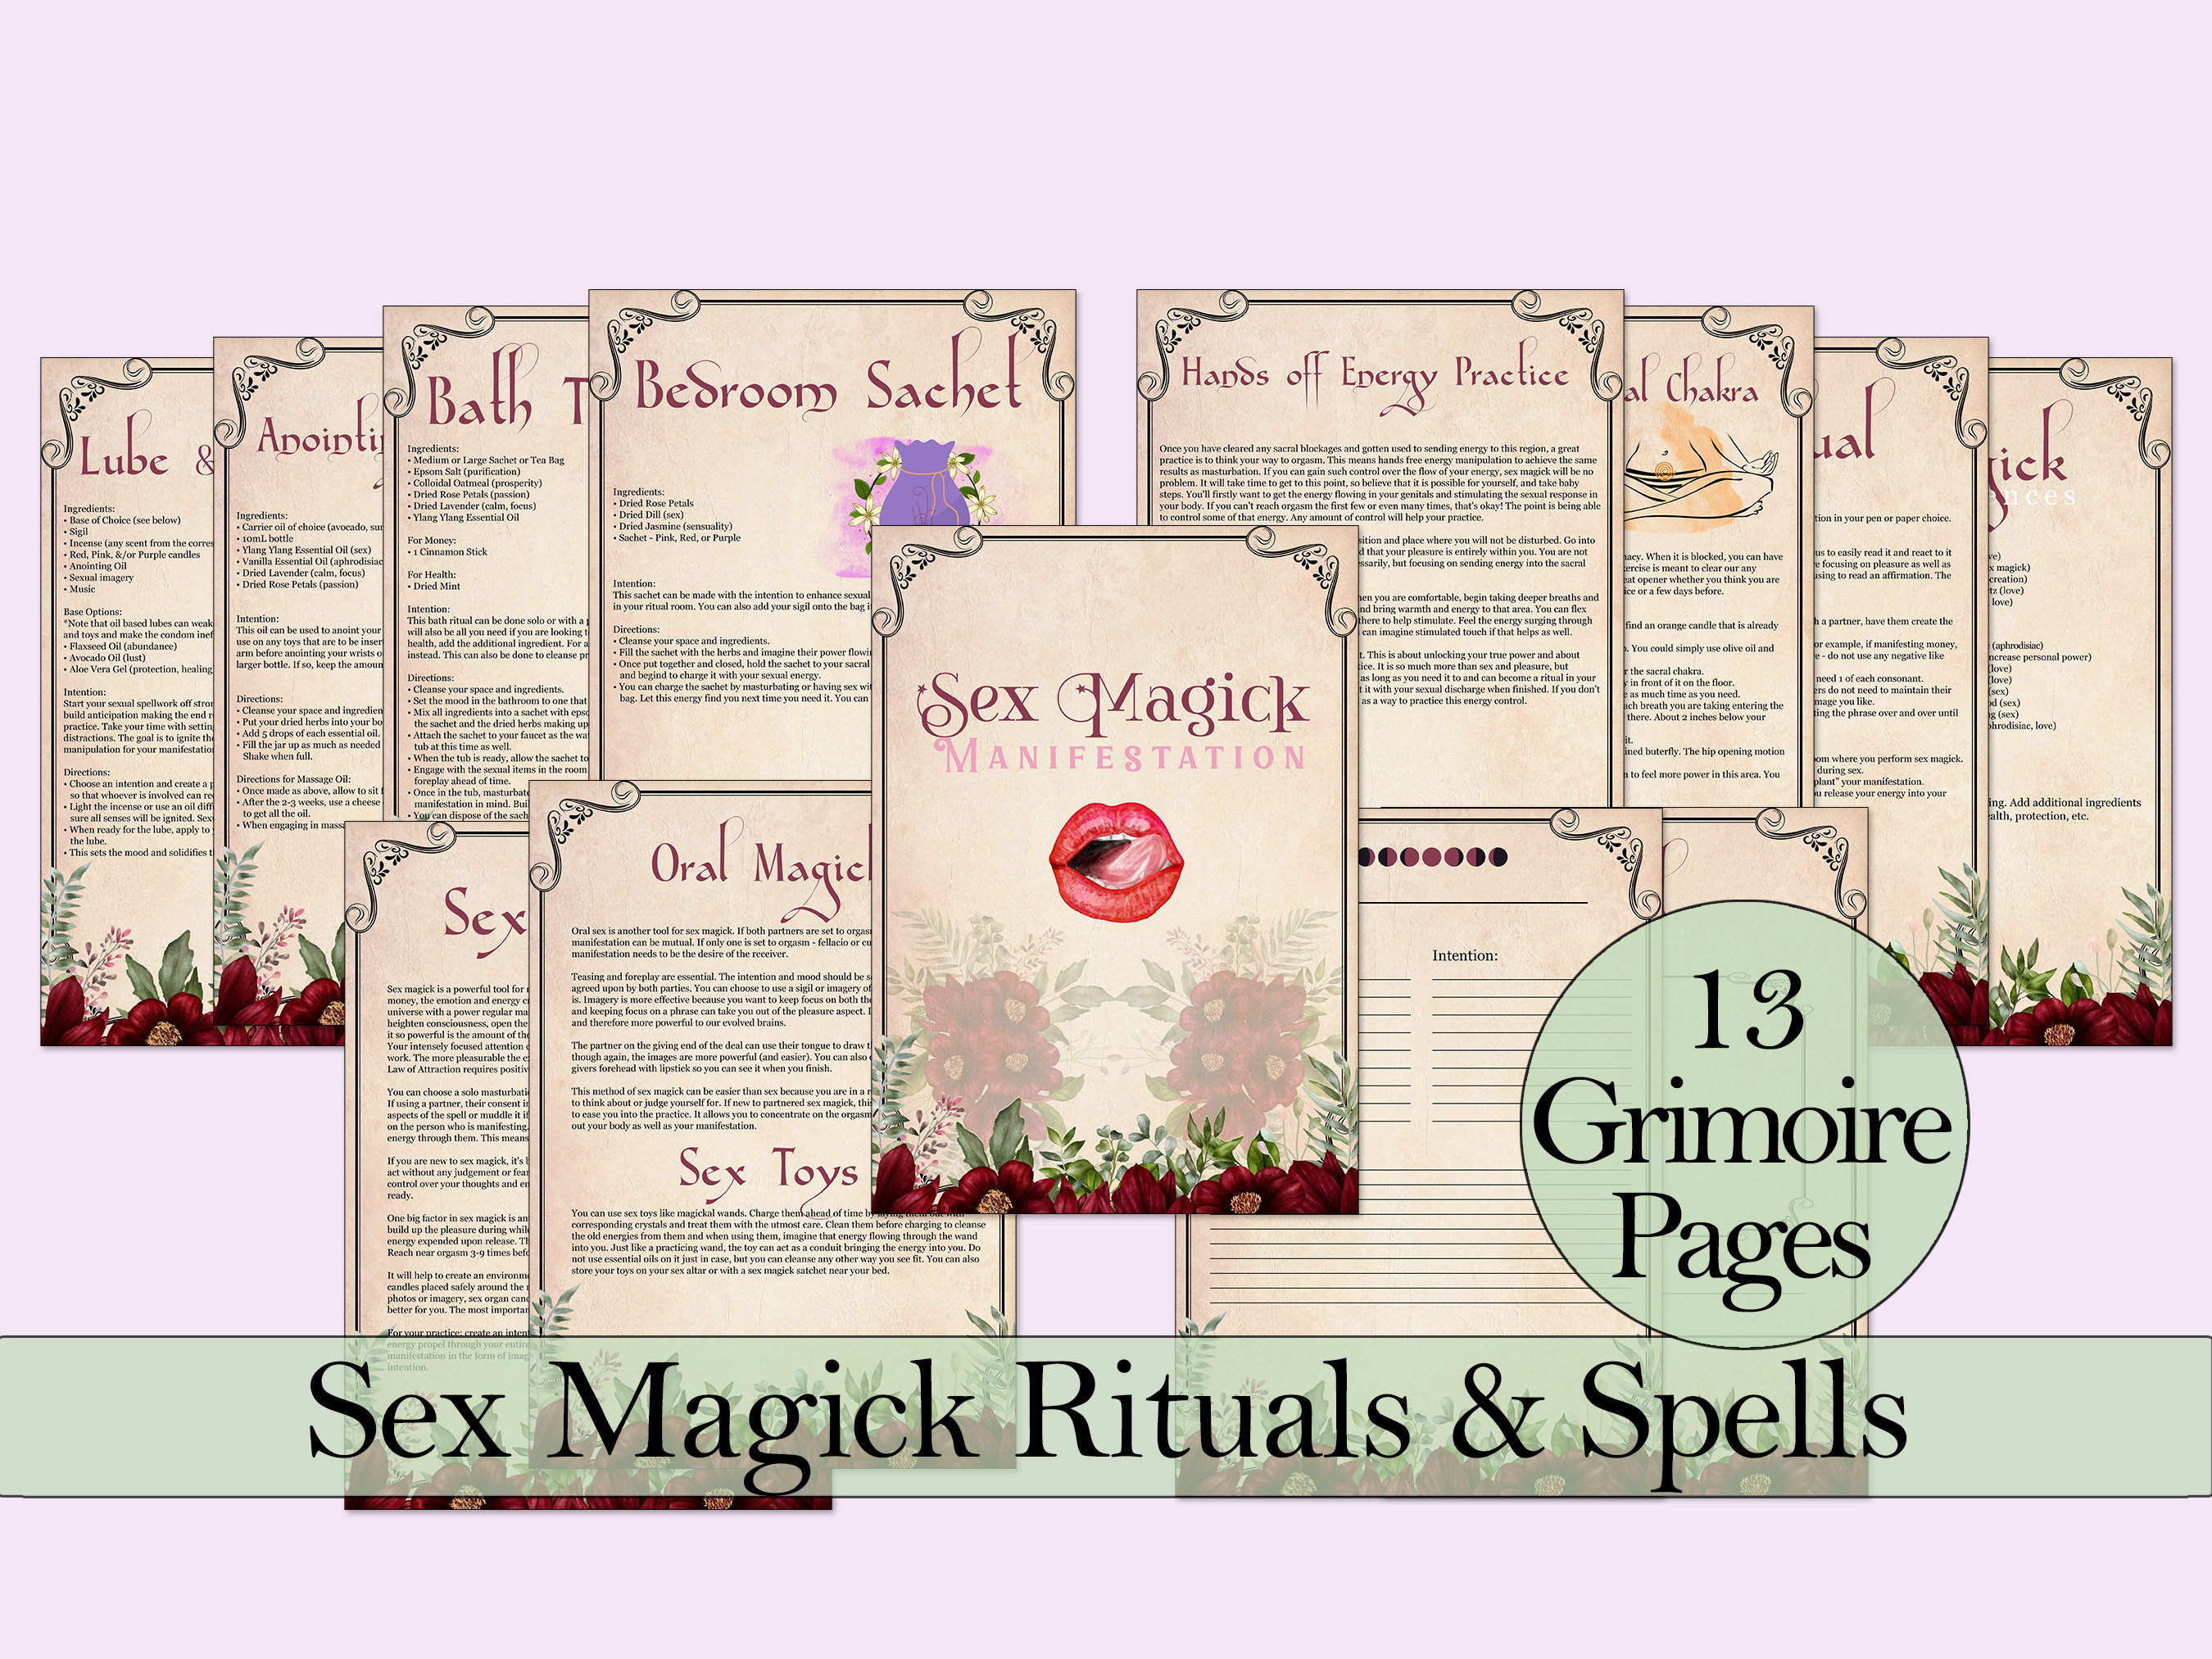 Partnered Sex Magic — Which Ritual